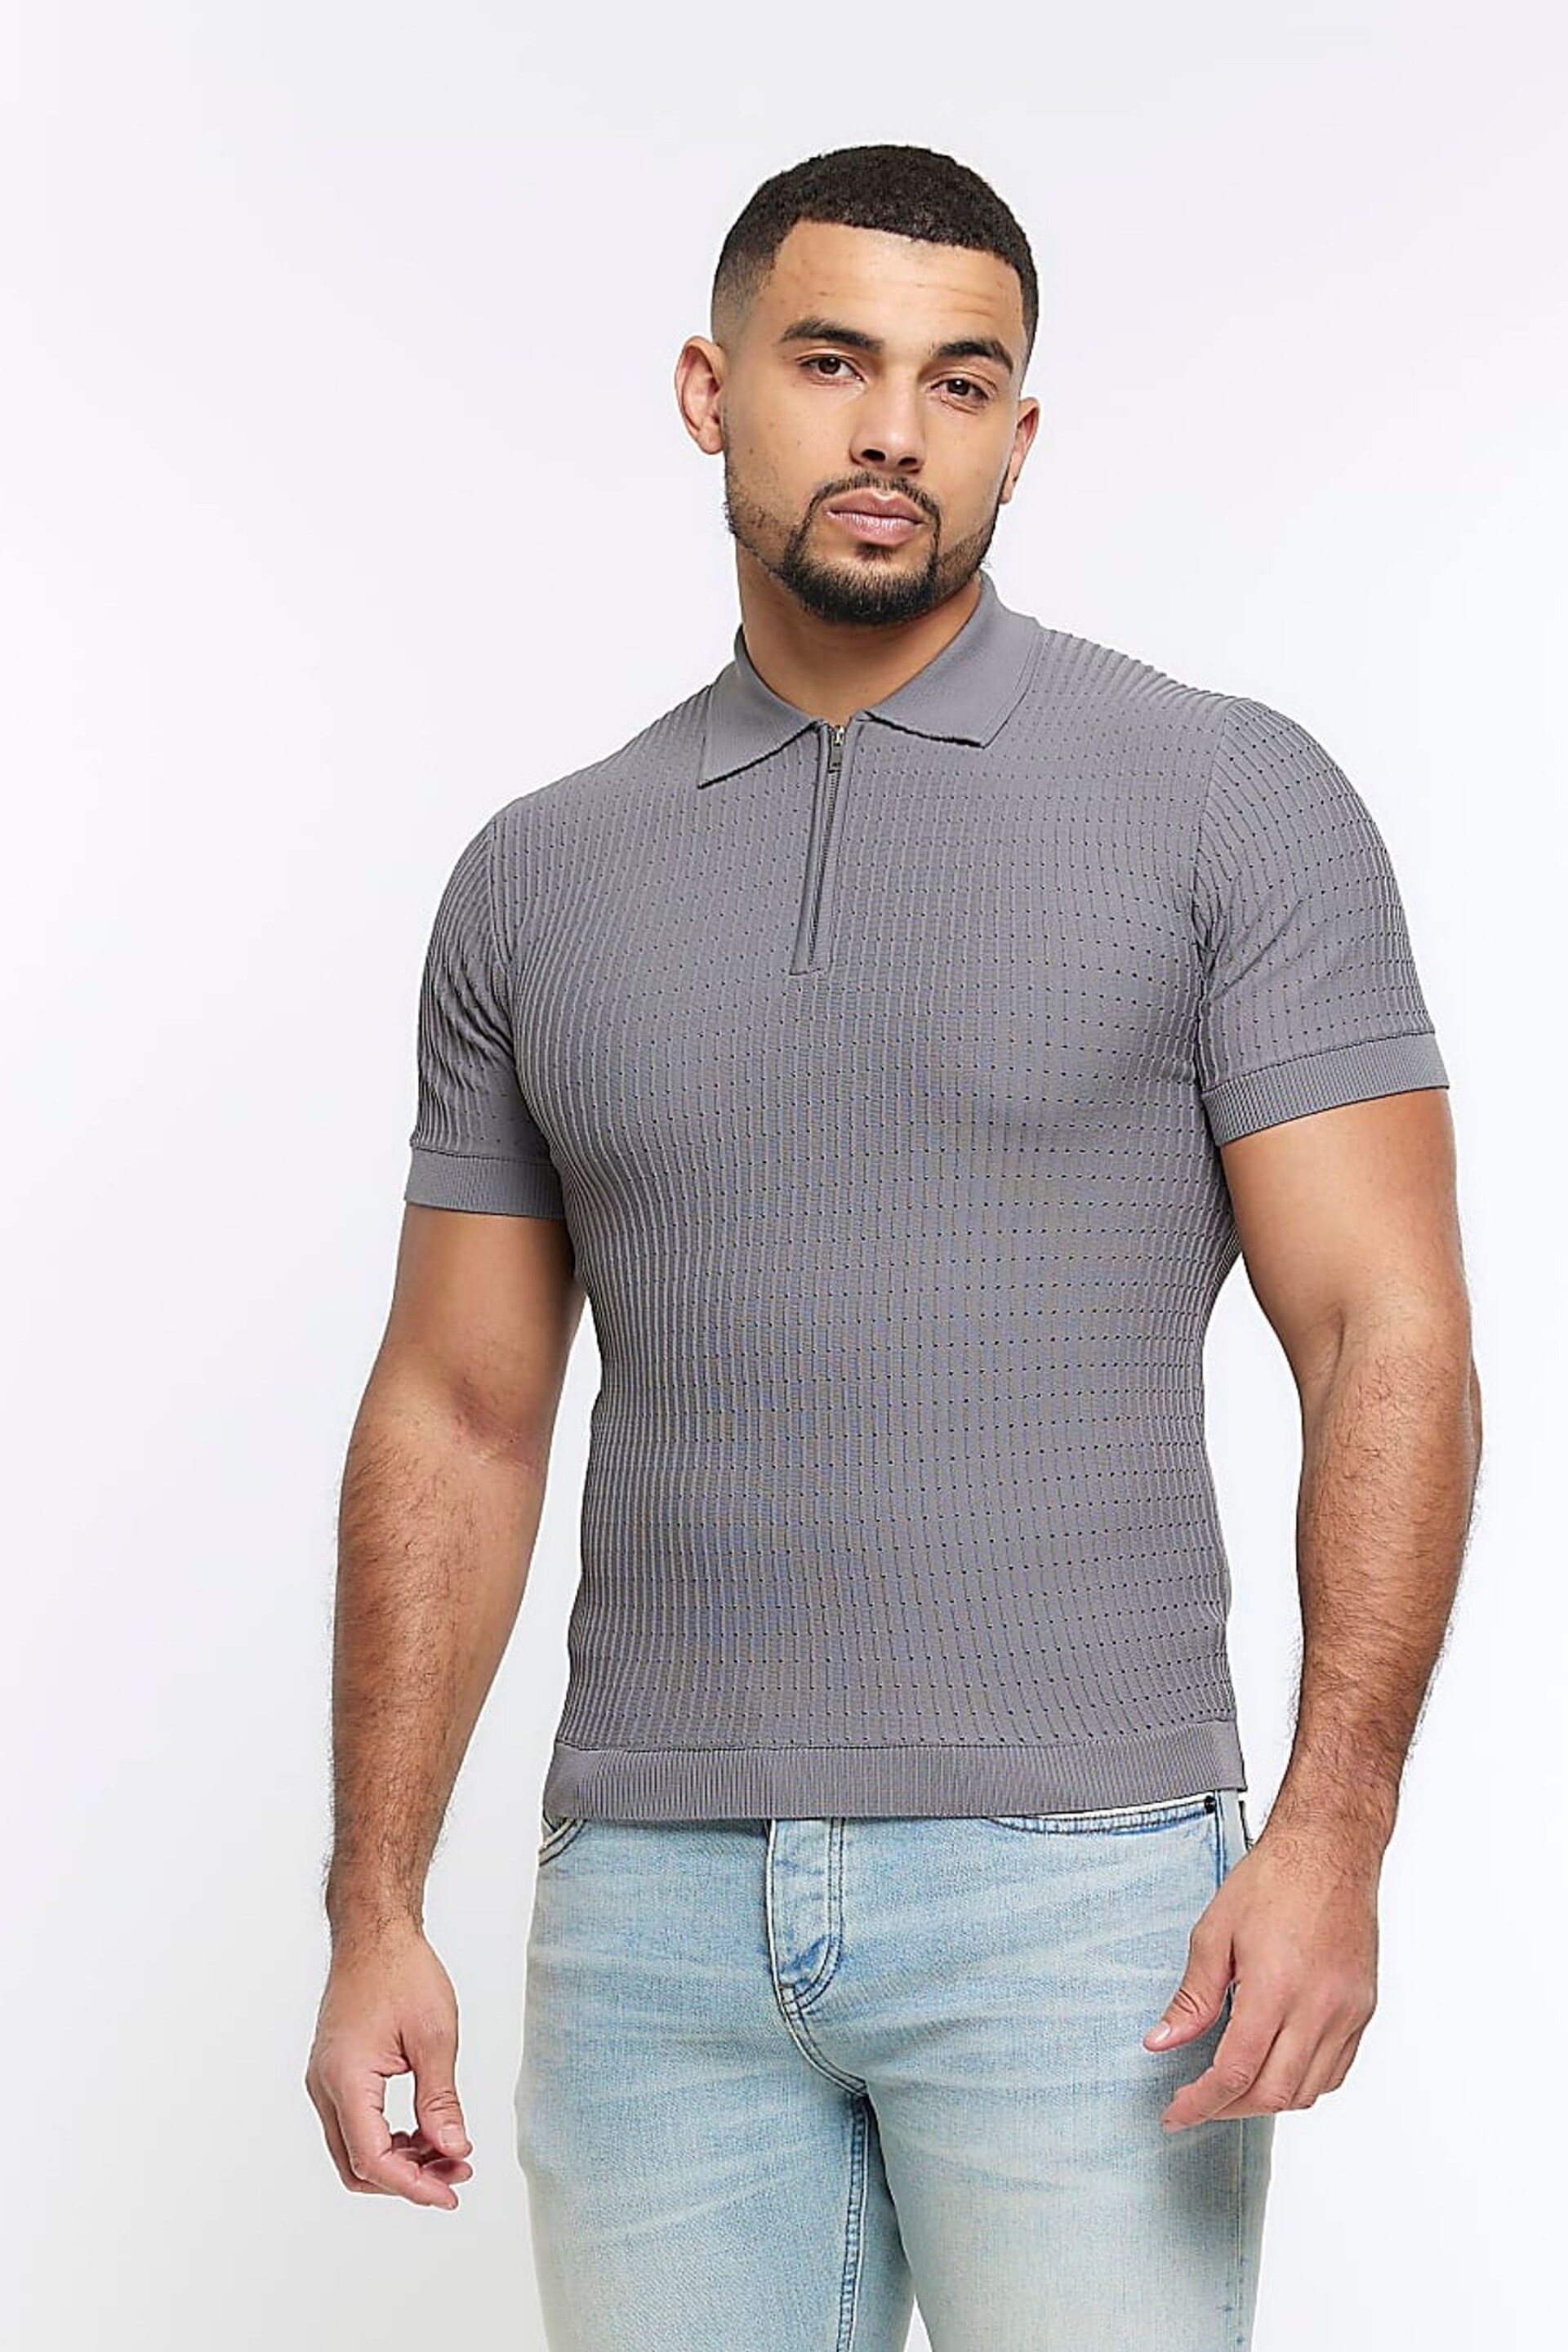 River Island Grey Muscle Fit Brick Polo Shirt - Image 12 of 13